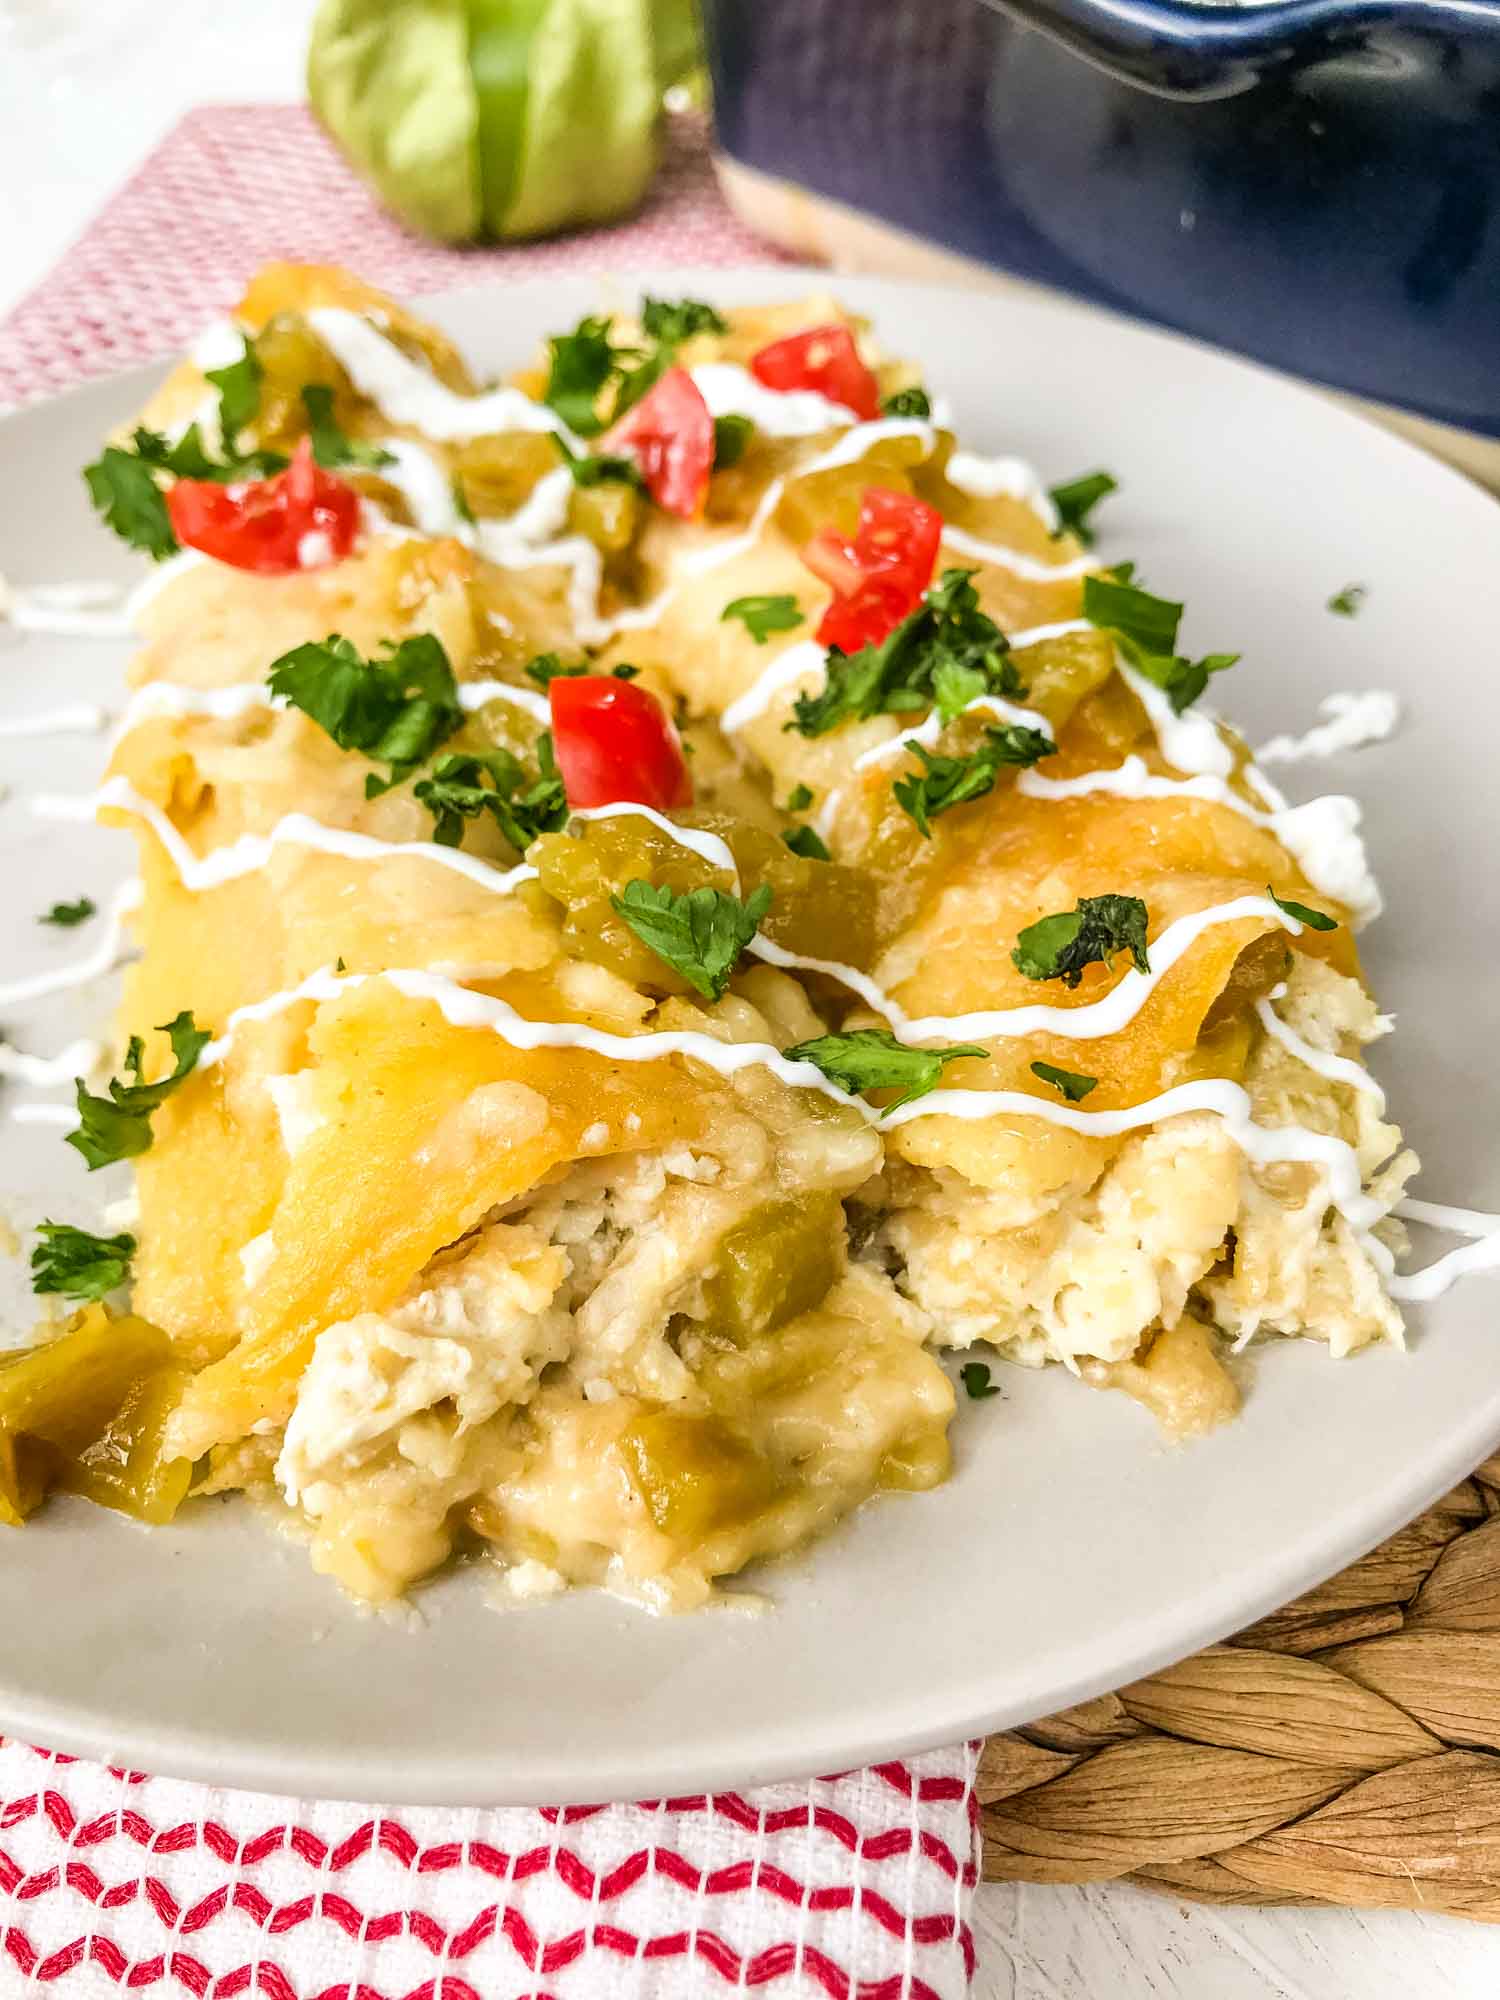 End view of two Creamy Chicken Enchiladas on a plate